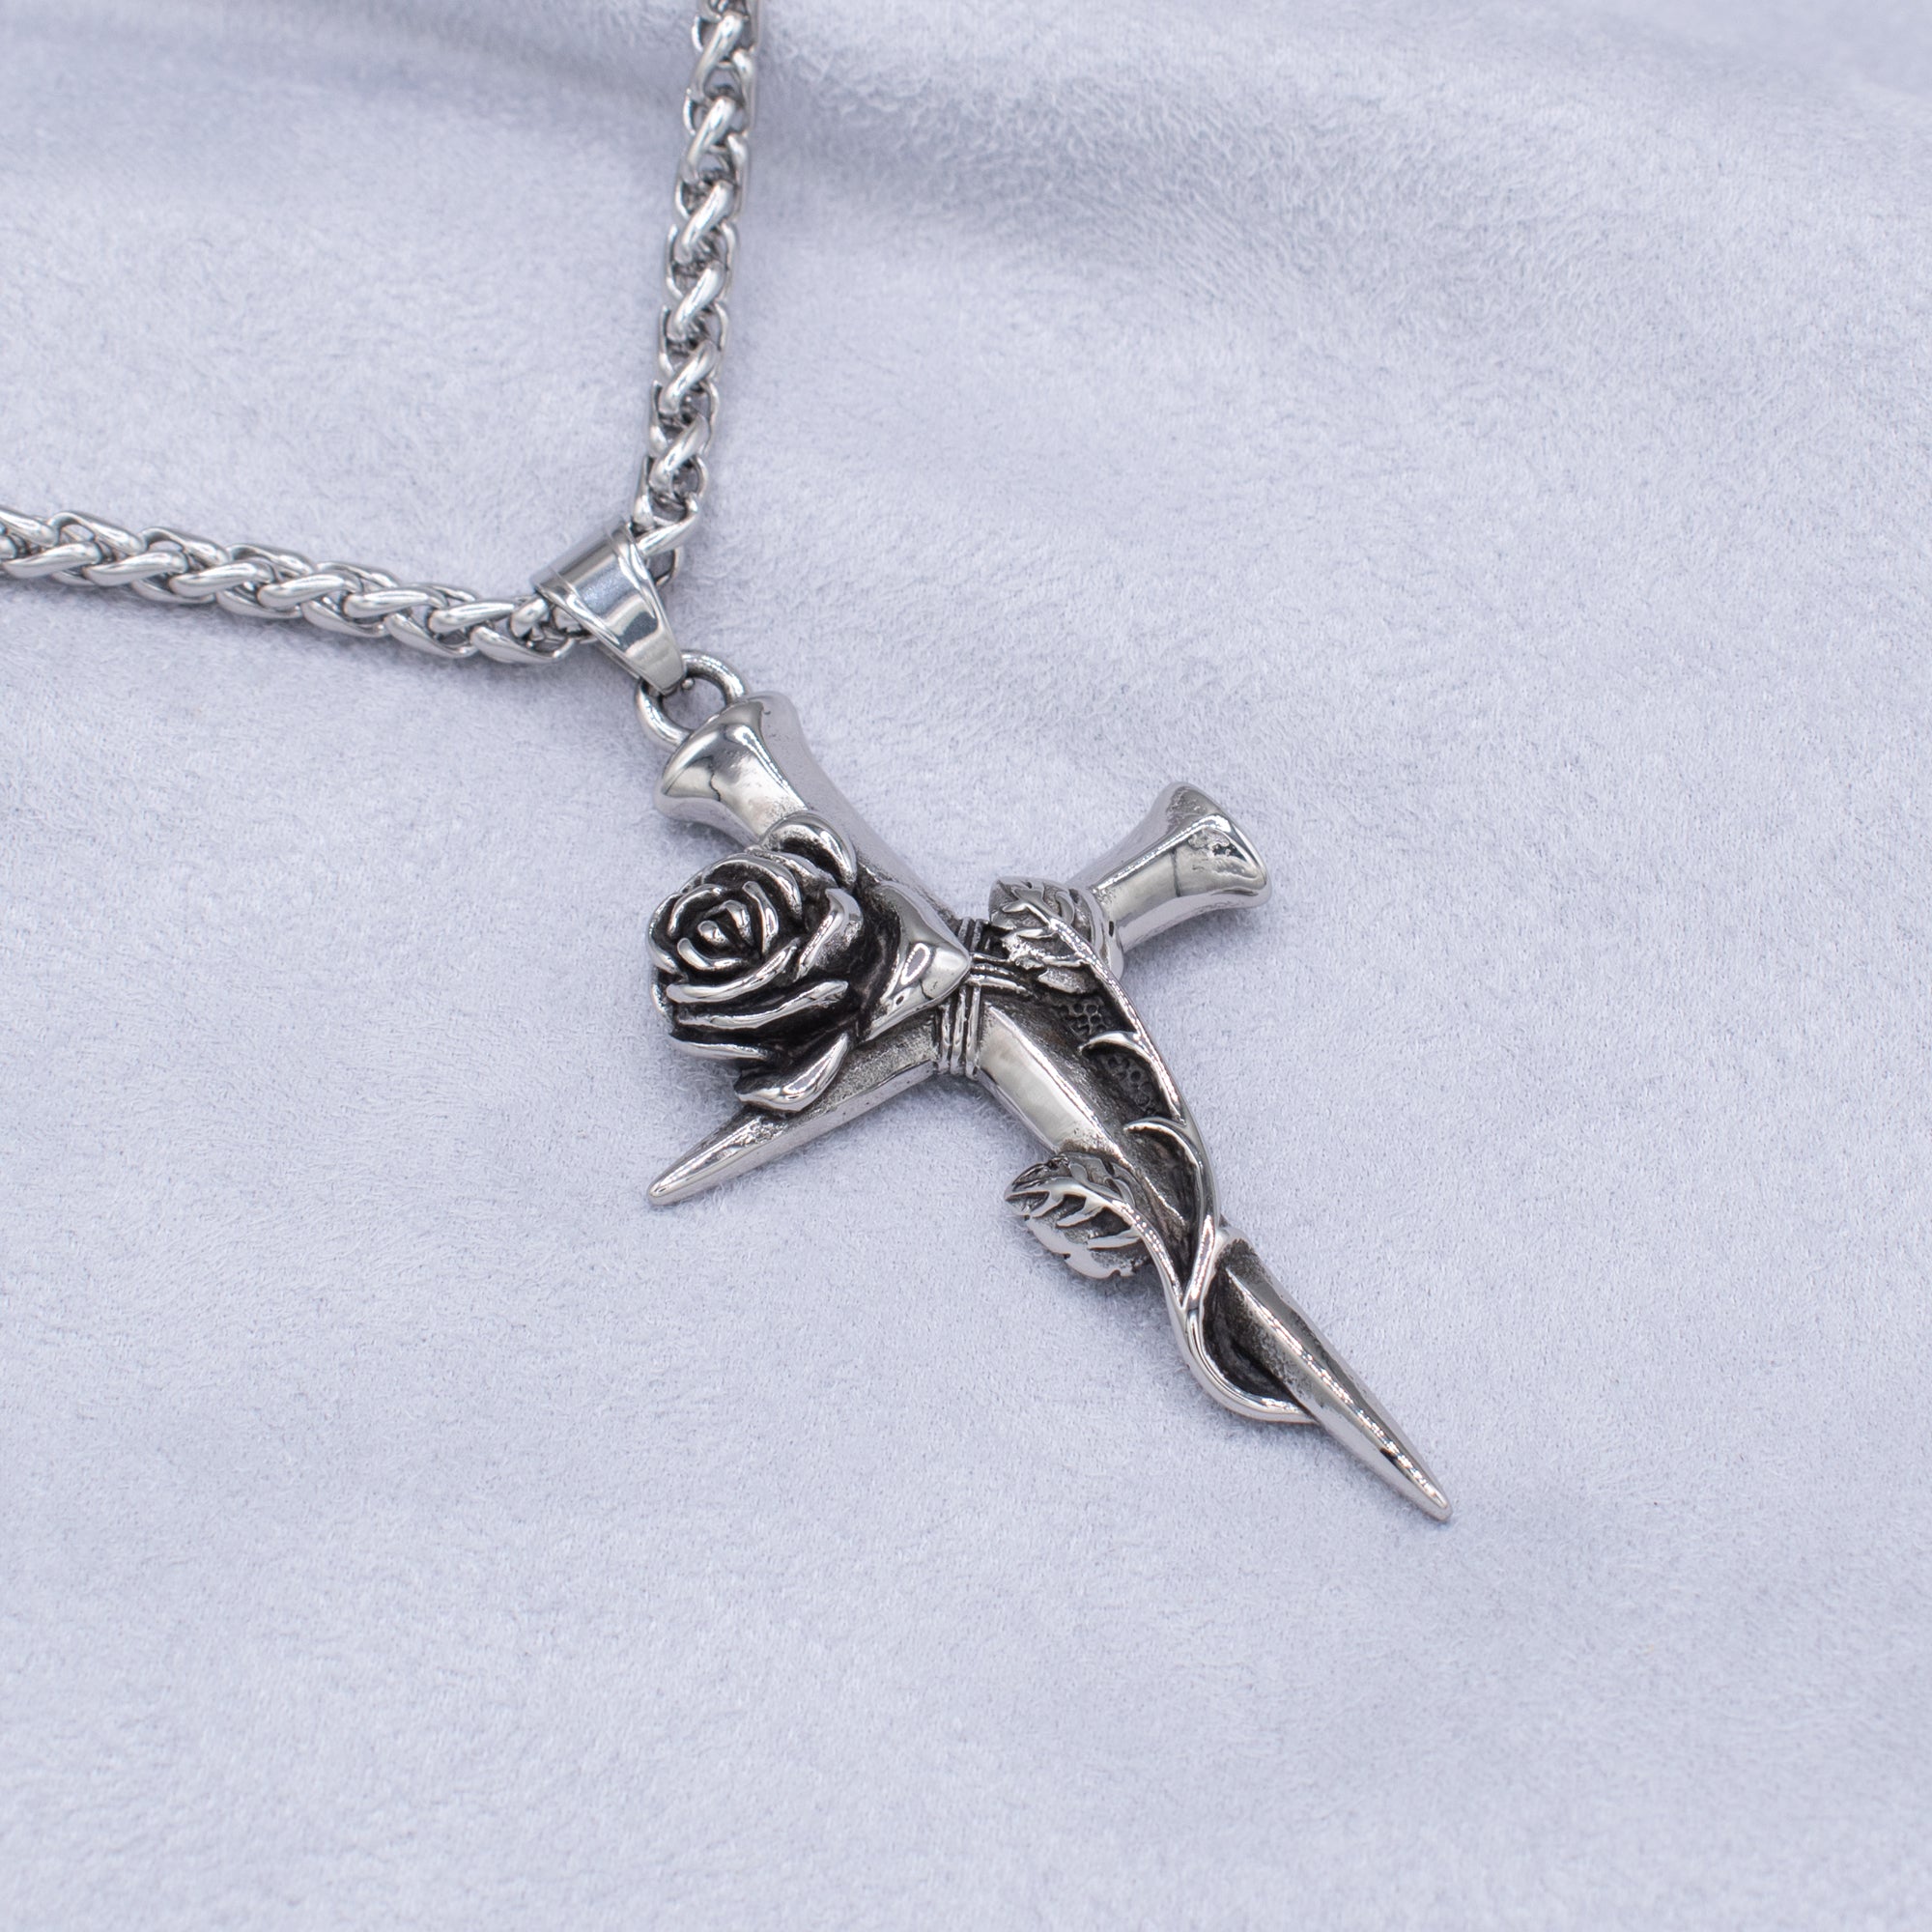 Stake & Rose Cross Pendant Necklace